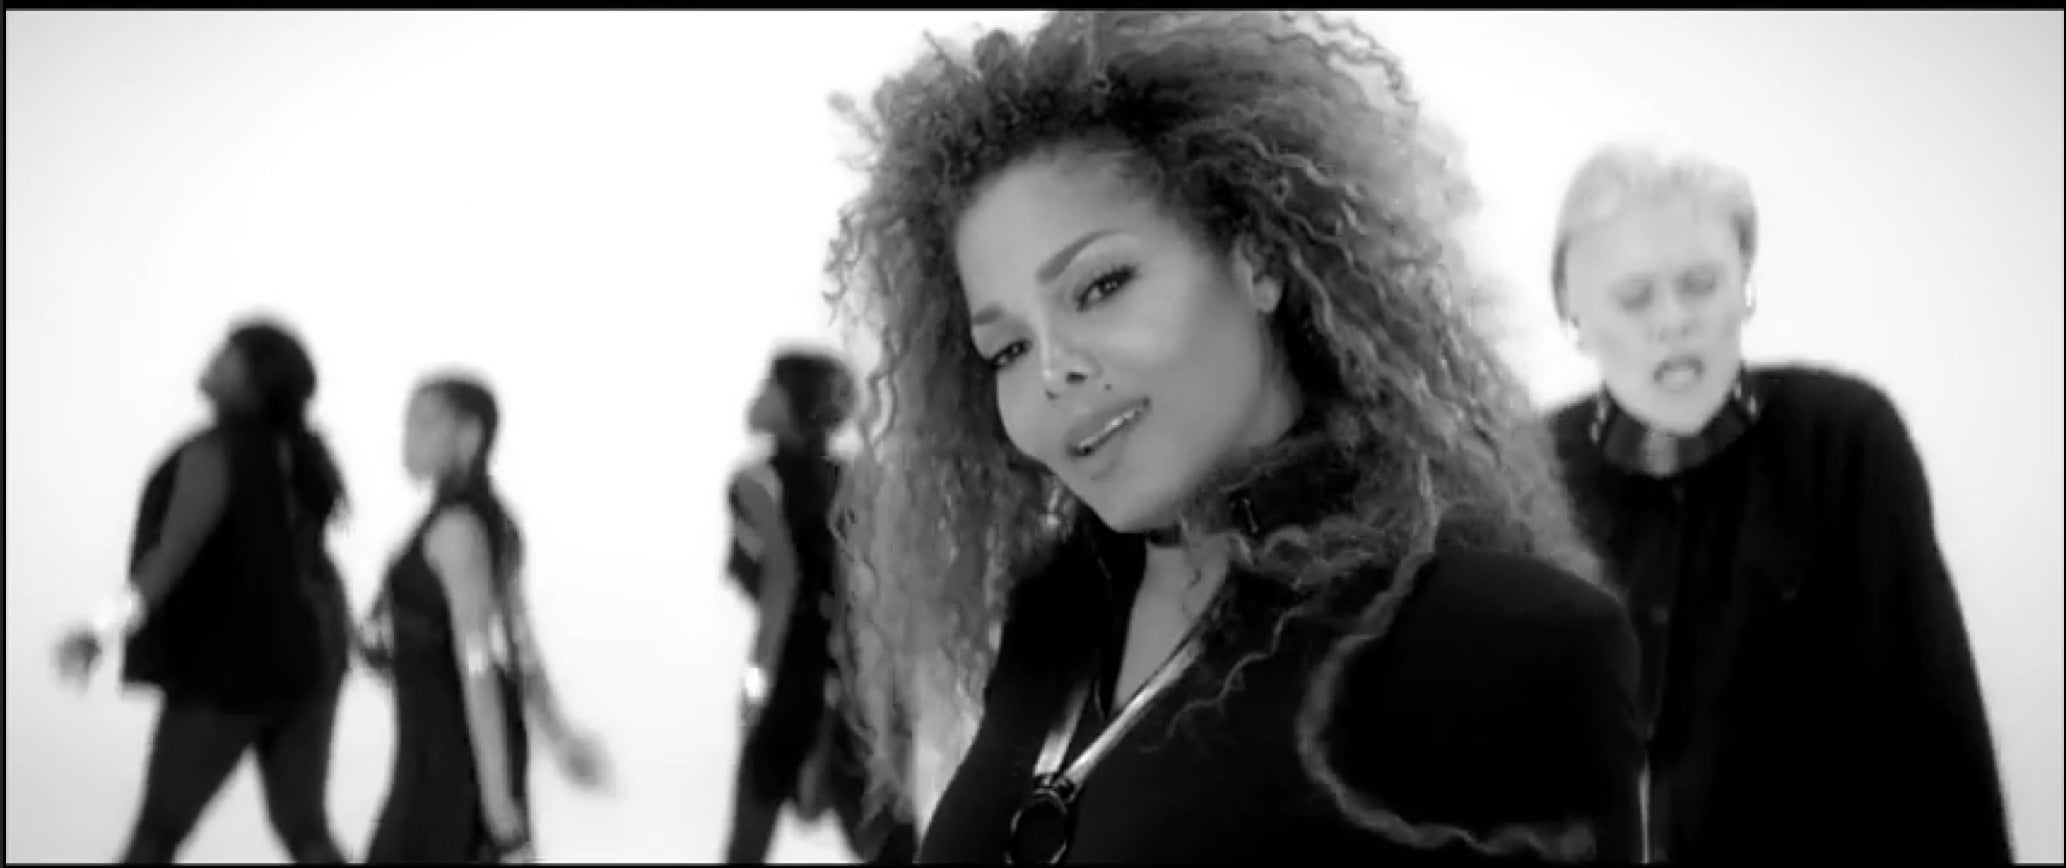 Janet Jackson is Back and Slaying in New Music Video for "Dammn Baby"
